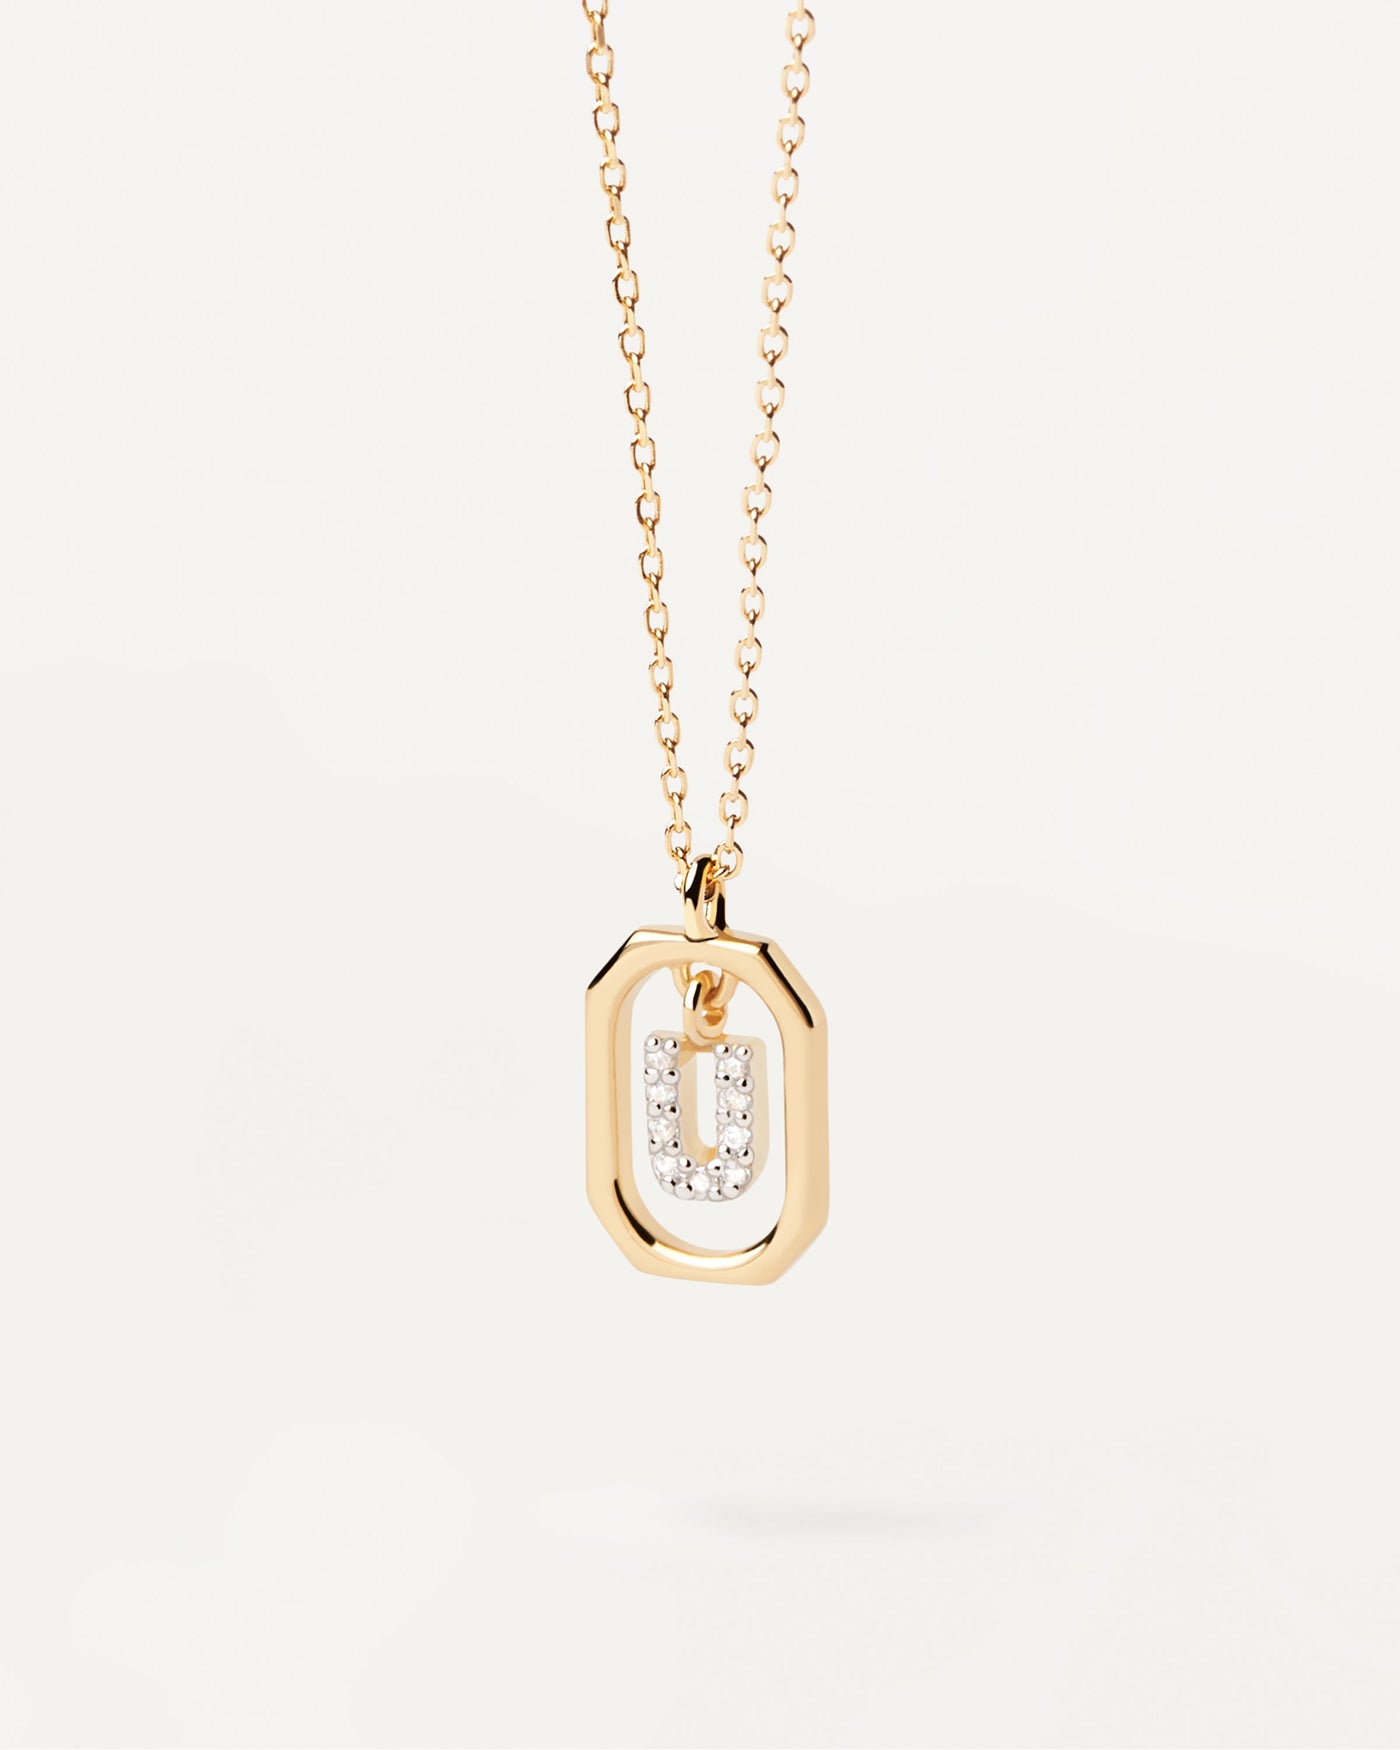 2023 Selection | Mini Letter U Necklace. Small initial U necklace in zirconia inside gold-plated silver octagonal pendant. Get the latest arrival from PDPAOLA. Place your order safely and get this Best Seller. Free Shipping.